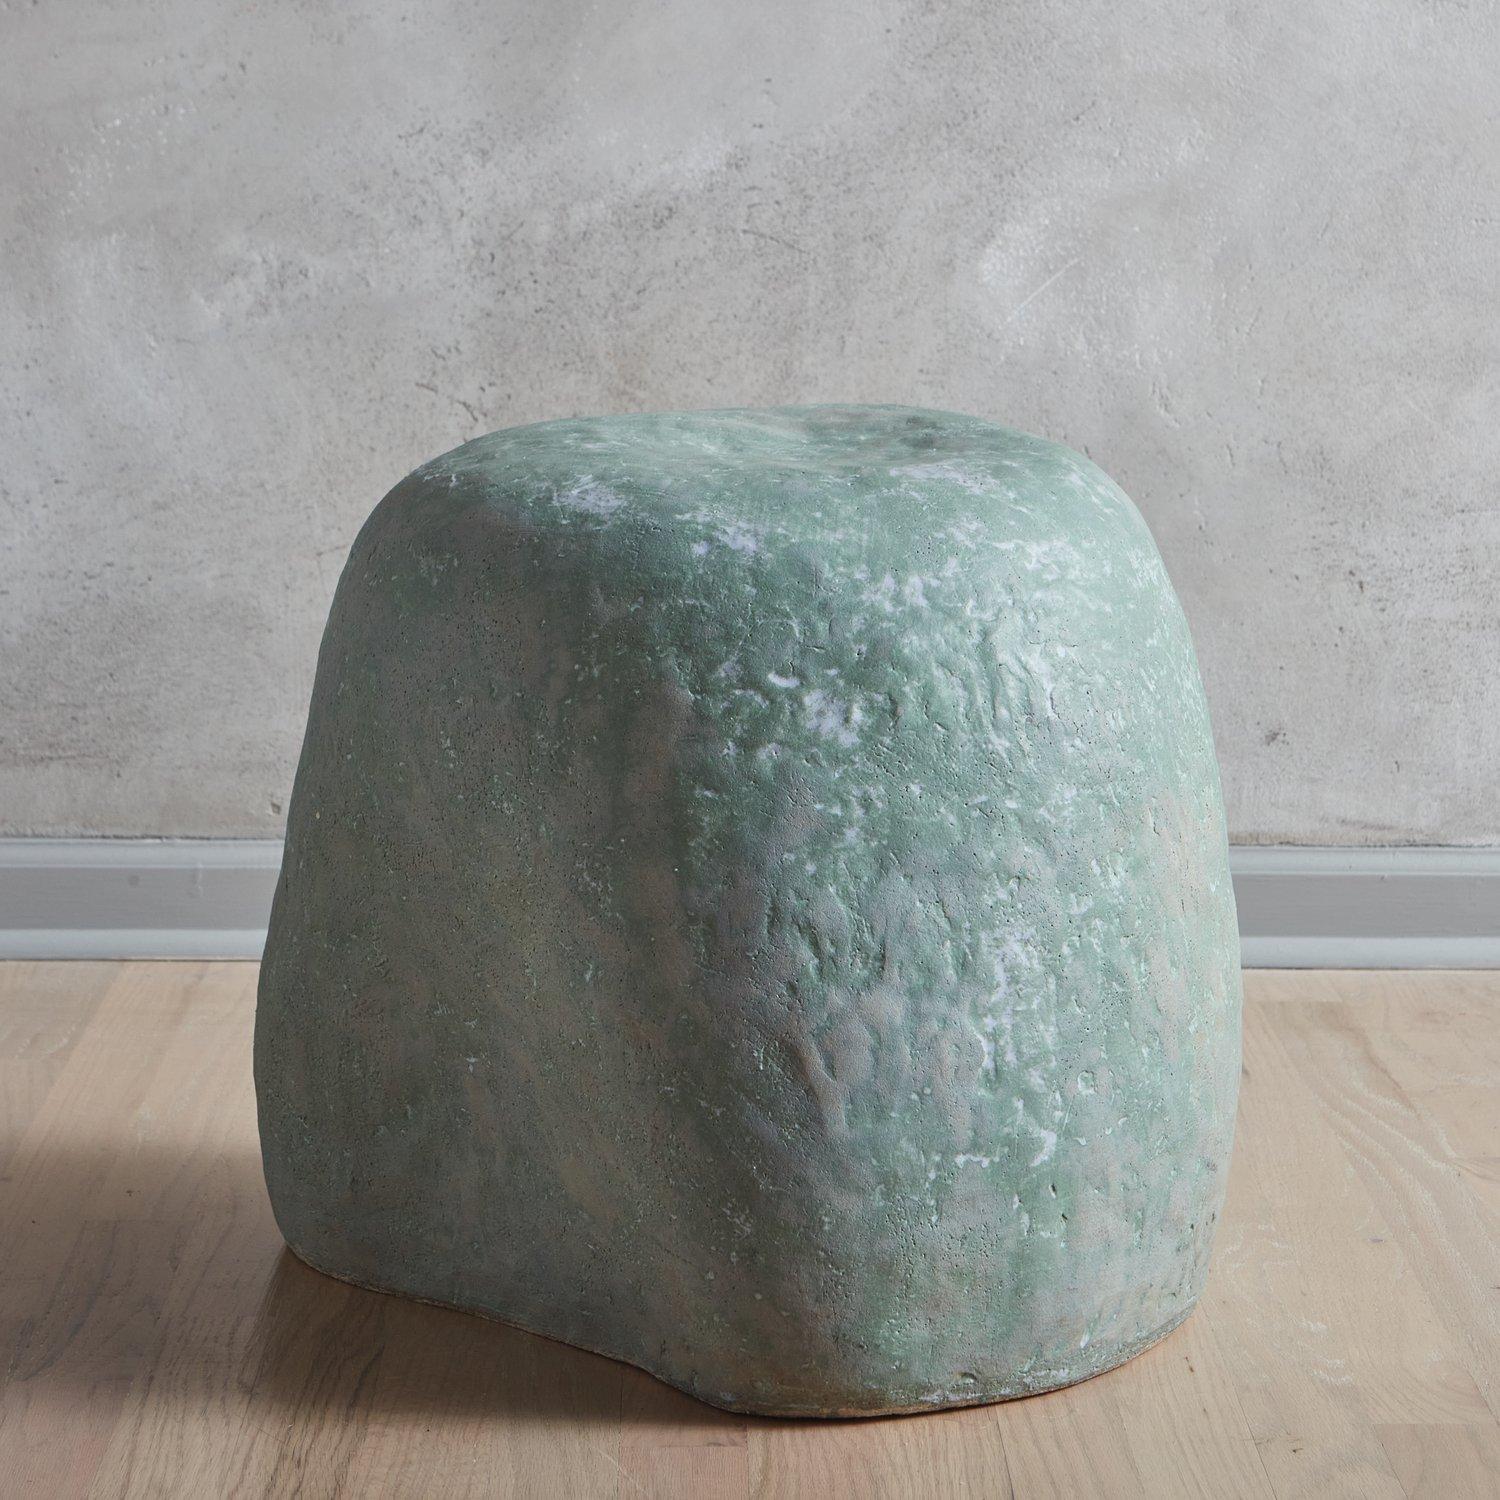 A ceramic Squish stool by Yuko Nishikawa in pine.

Squish Stools form a continuous body together with each ceramic stool squishing and being squished by other stools. They were created during the pandemic in 2020, a time in which touch and